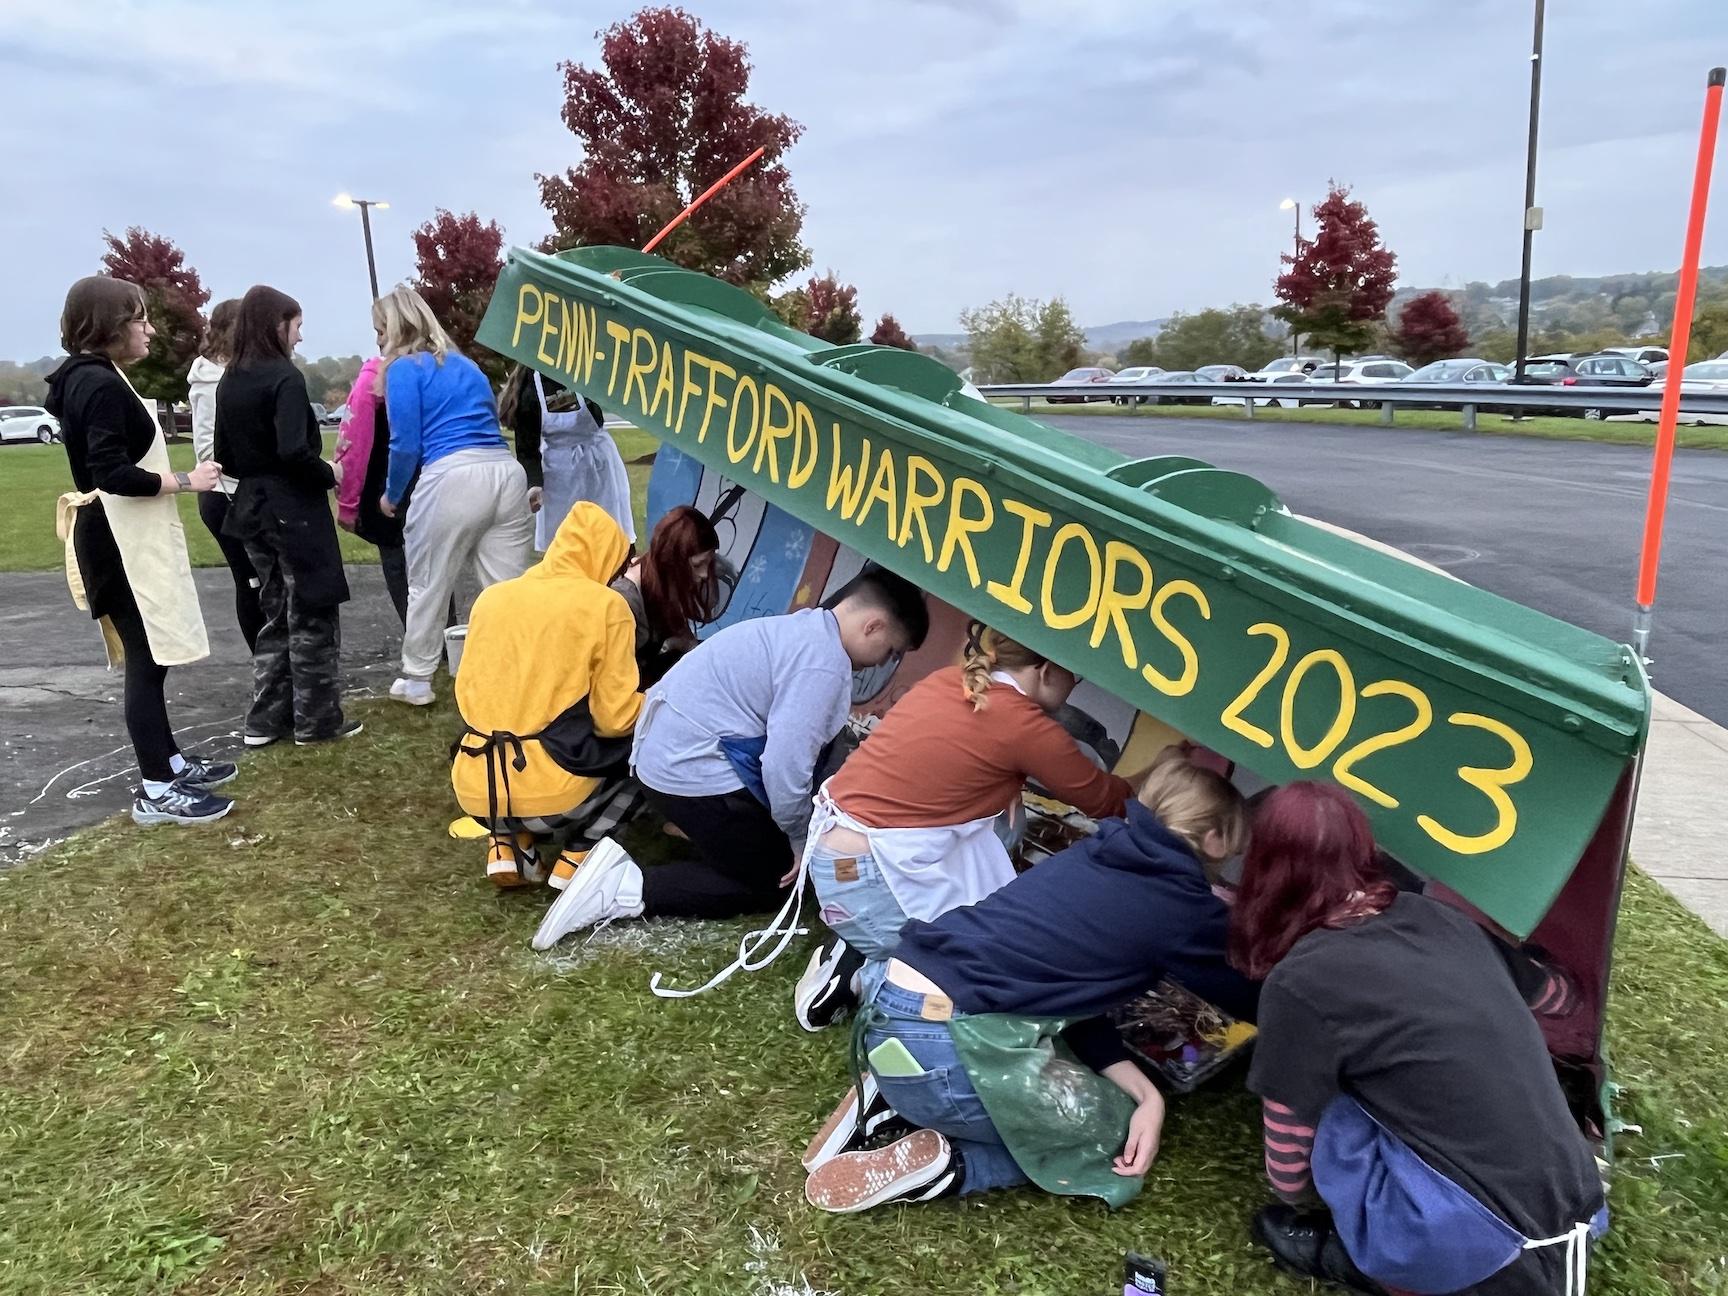 Students work together on painting the plow